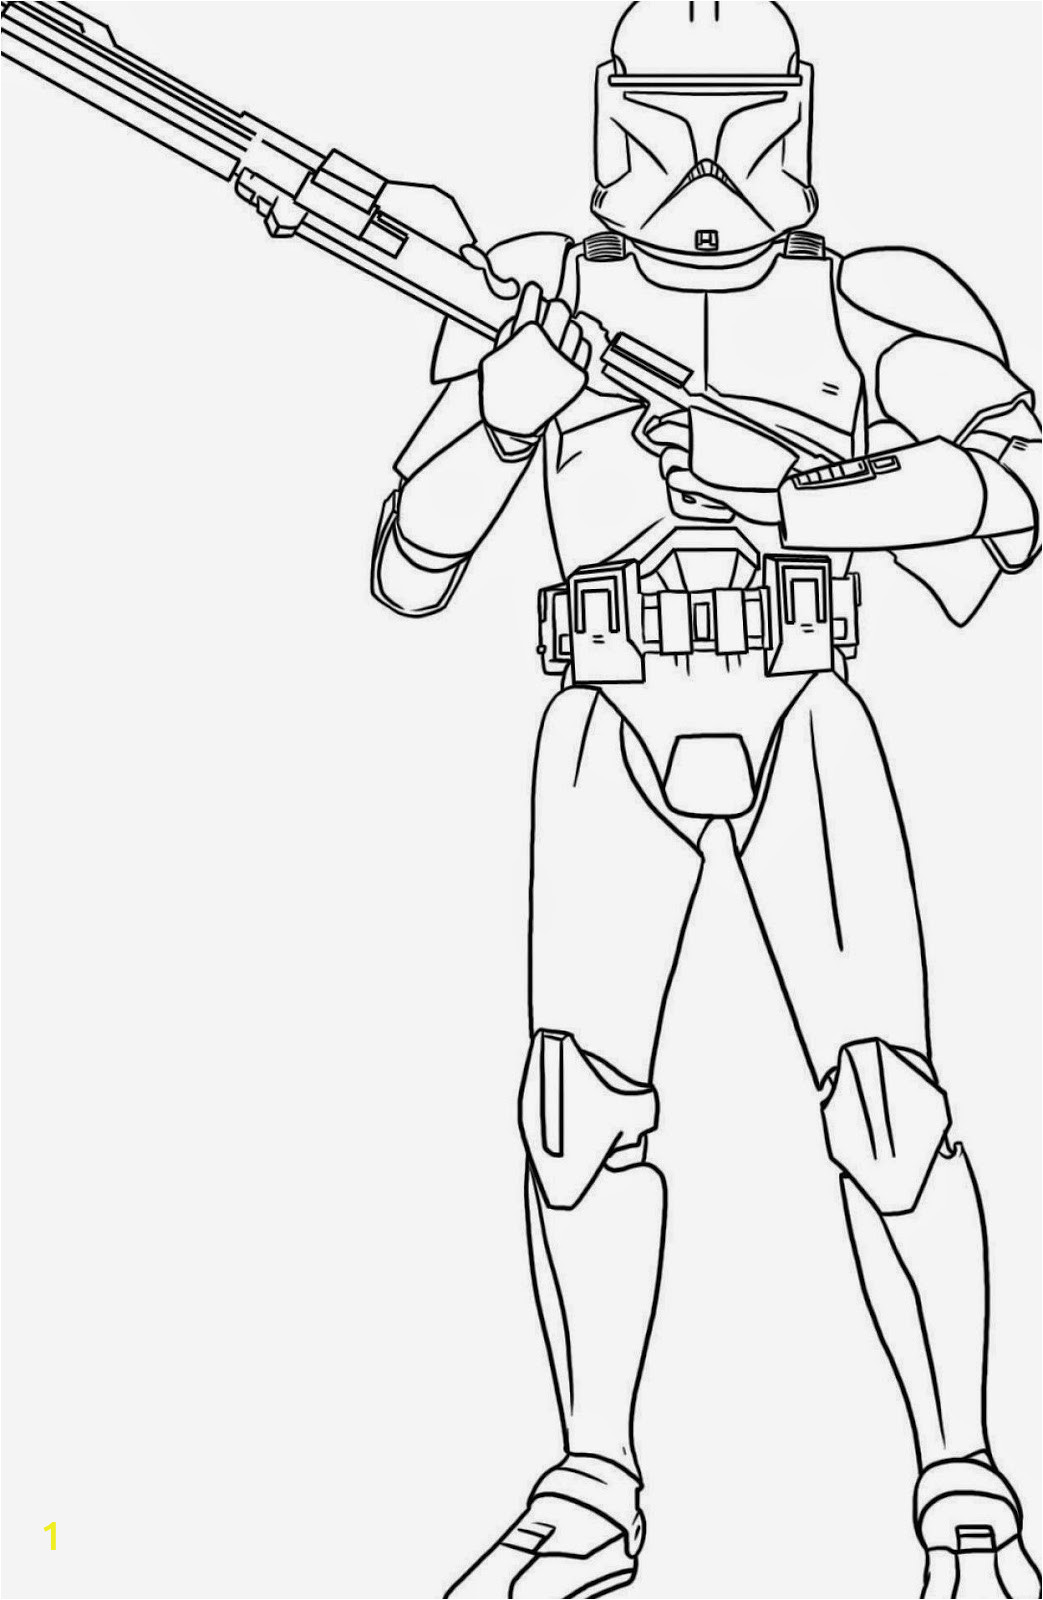 Free Printable Star Wars Coloring Pages Coloring Pages Star Wars Free Printable Coloring Pages